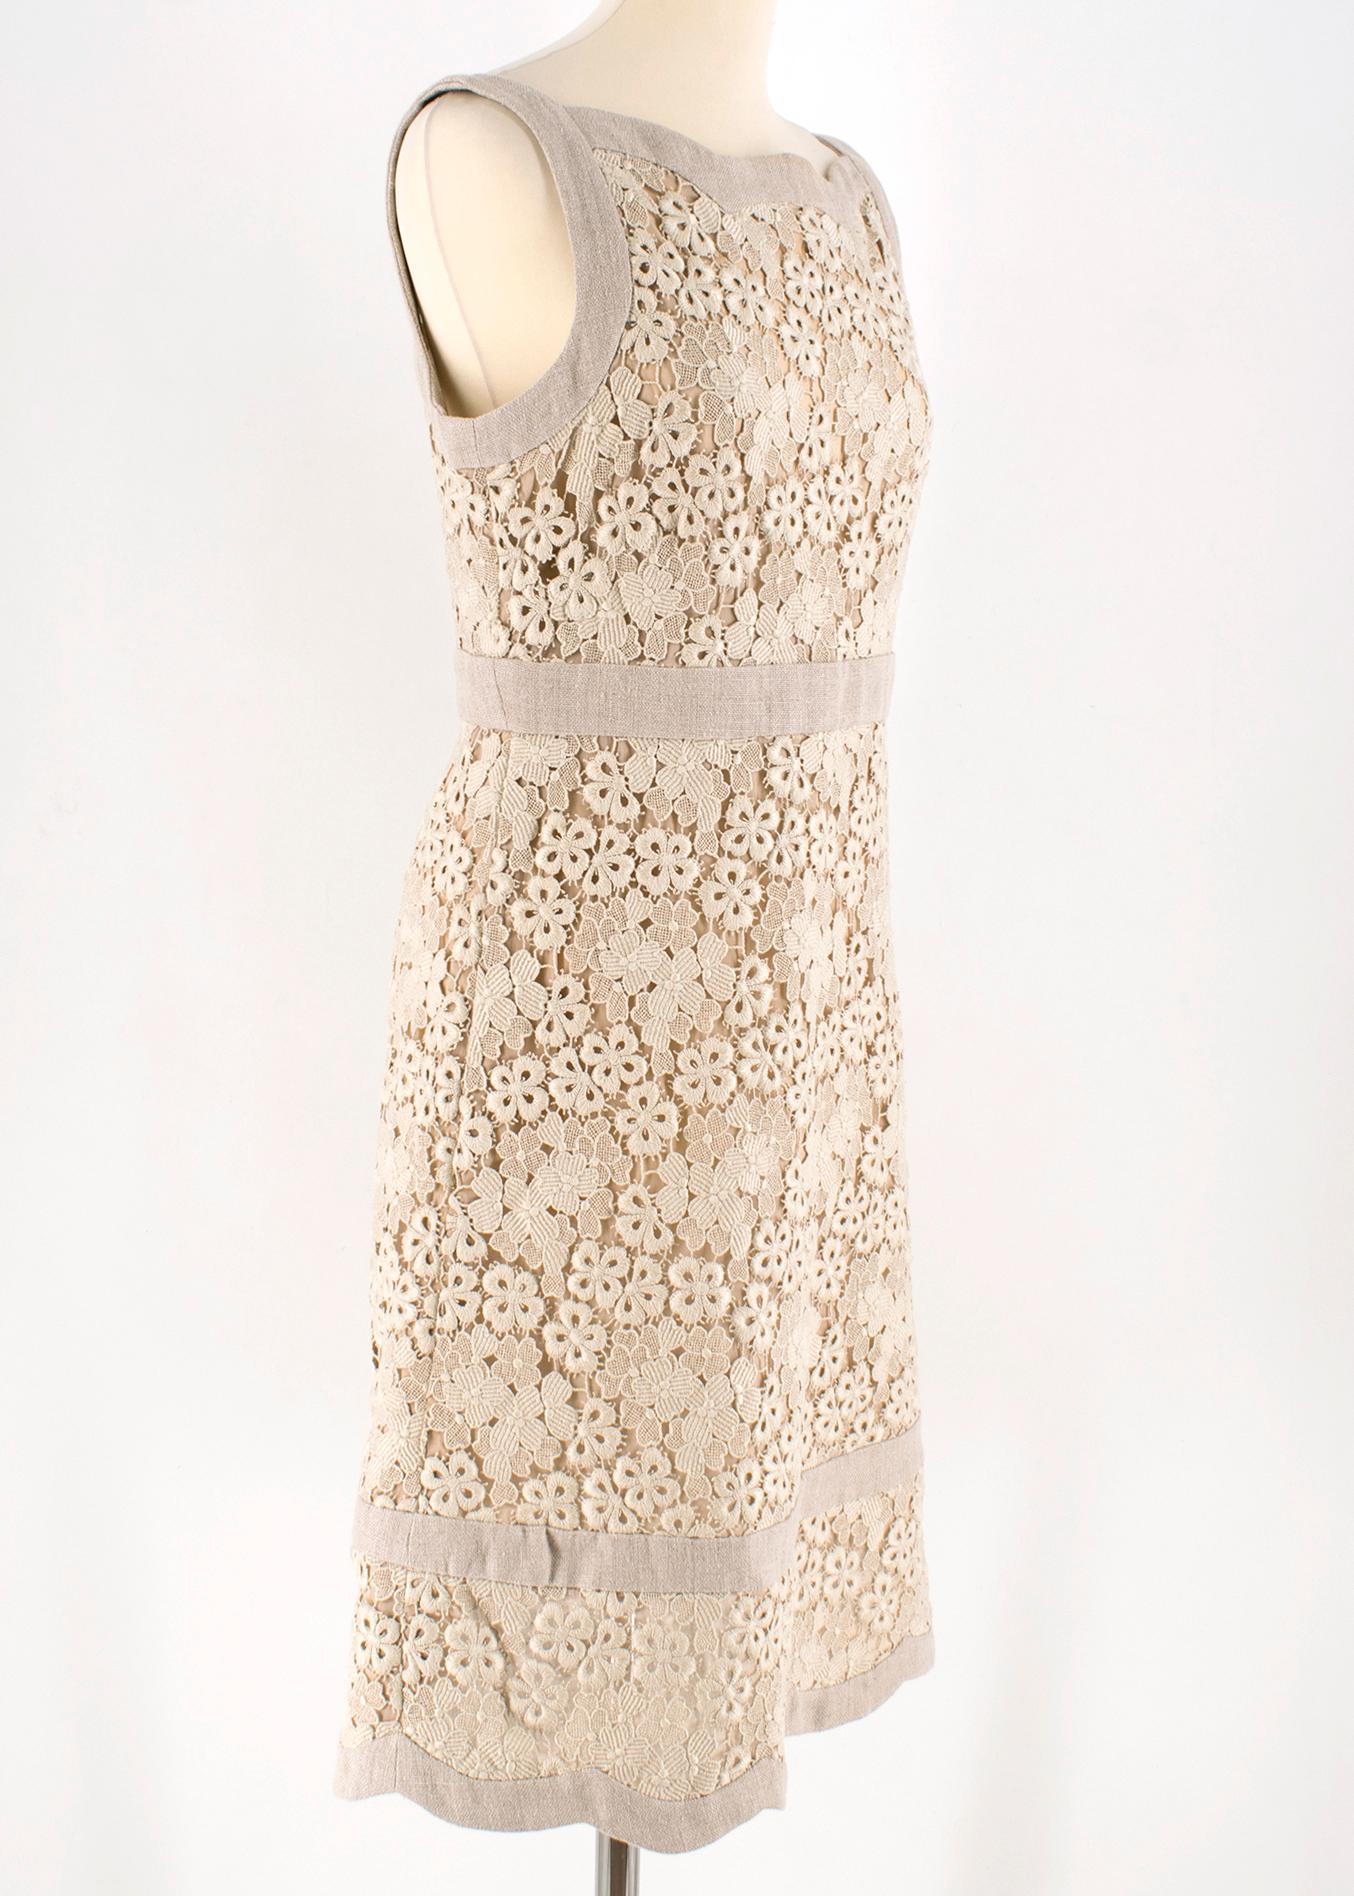 Valentino Beige Linen Lace A-line Midi Dress

- beige linen dress
- a-line silhouette
- sleeveless
- natural fabric lined
- zip closure to the side

Please note, these items are pre-owned and may show some signs of storage, even when unworn and